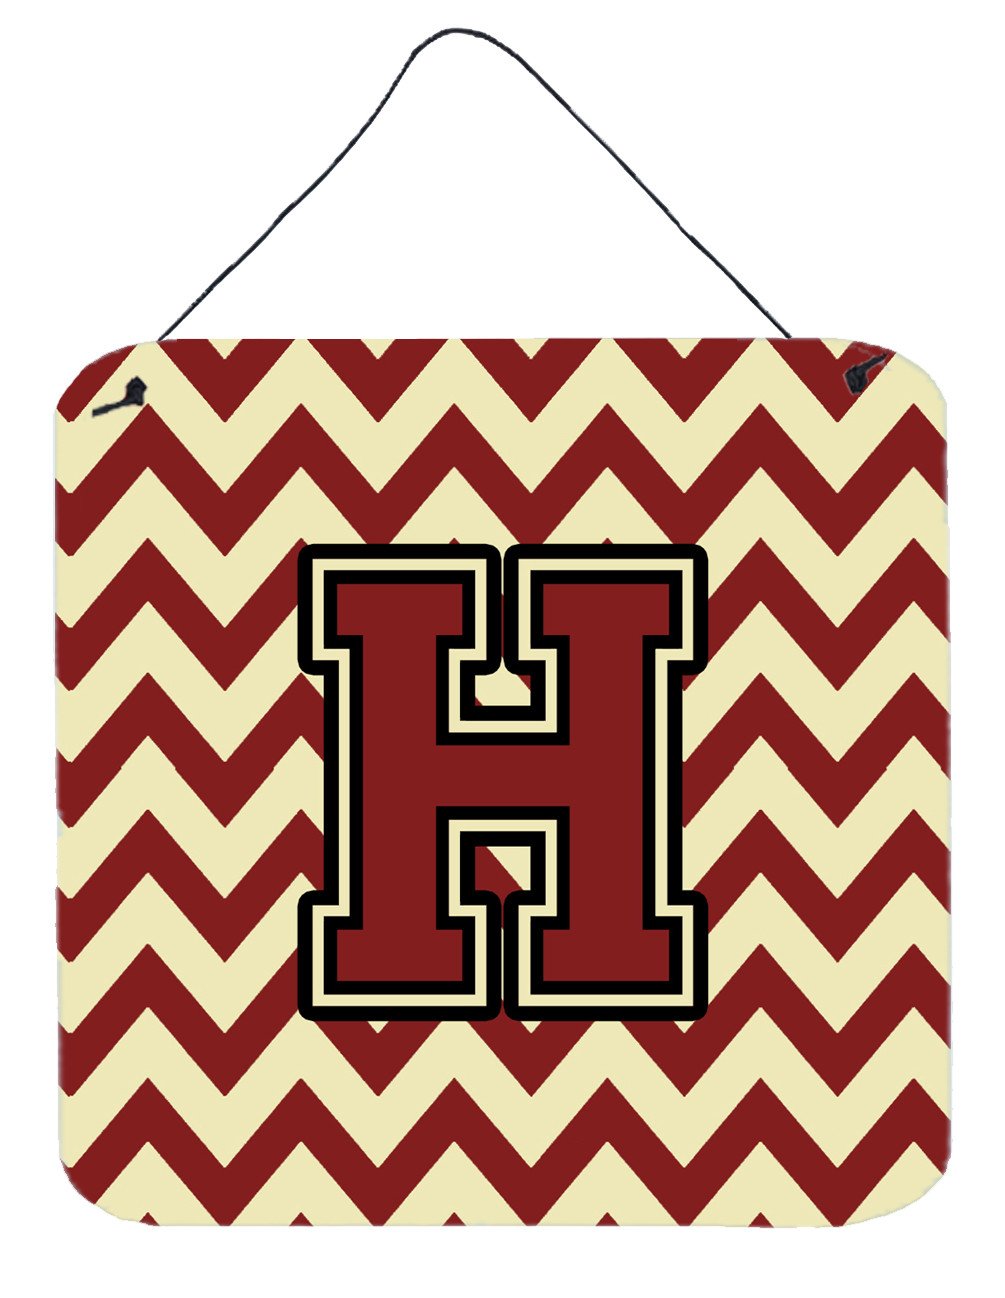 Letter H Chevron Maroon and Gold Wall or Door Hanging Prints CJ1061-HDS66 by Caroline's Treasures